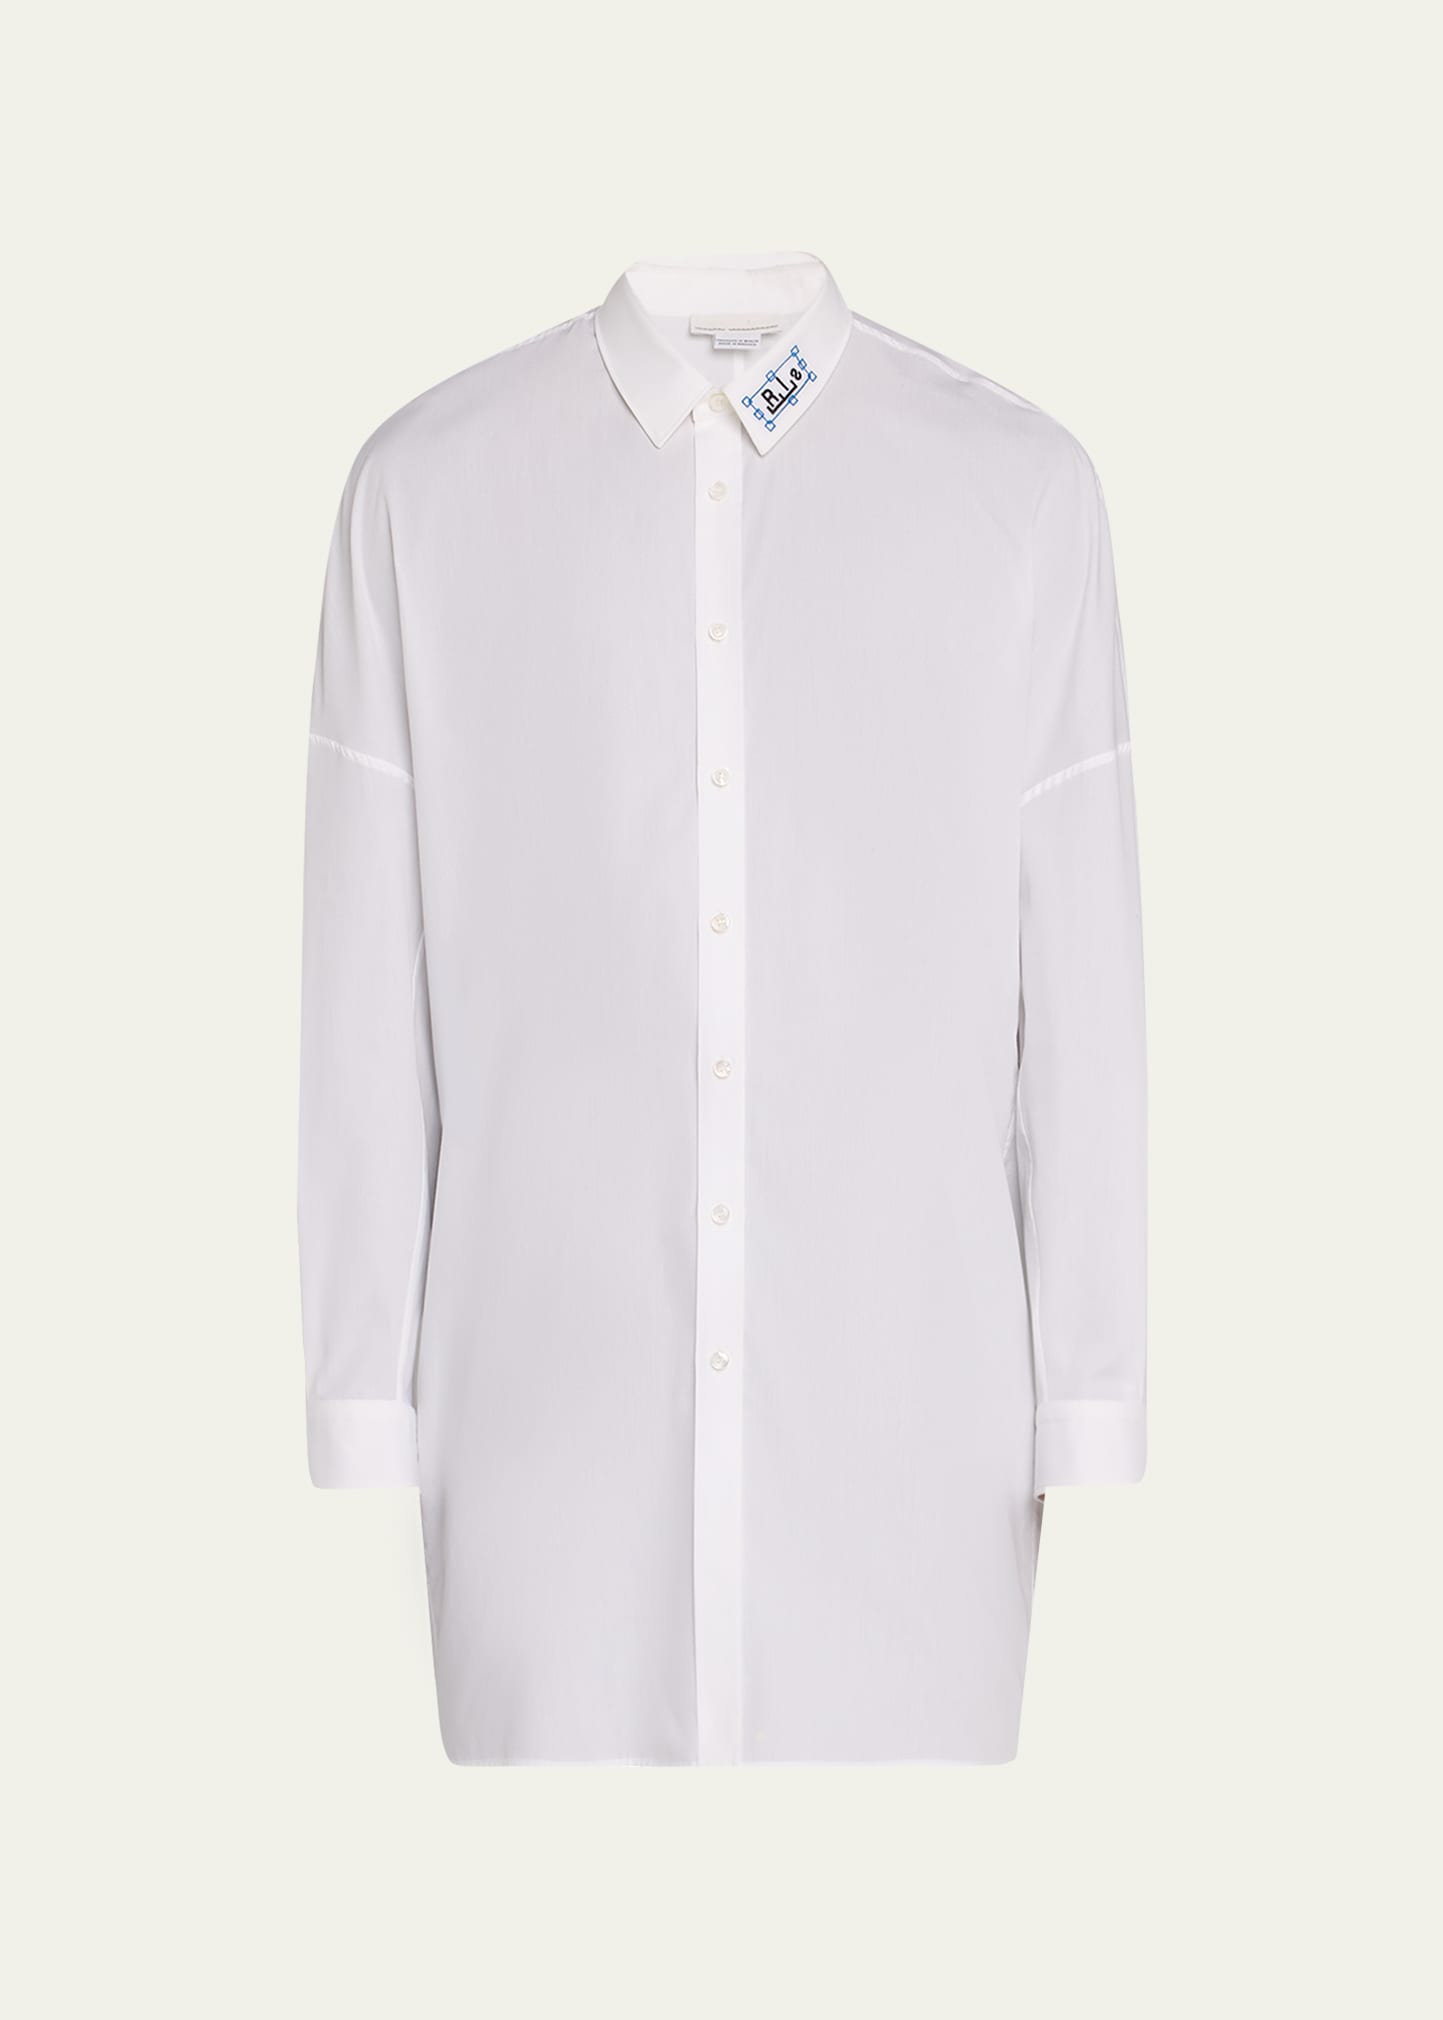 Men's Shirt Dress with Embroidered Collar